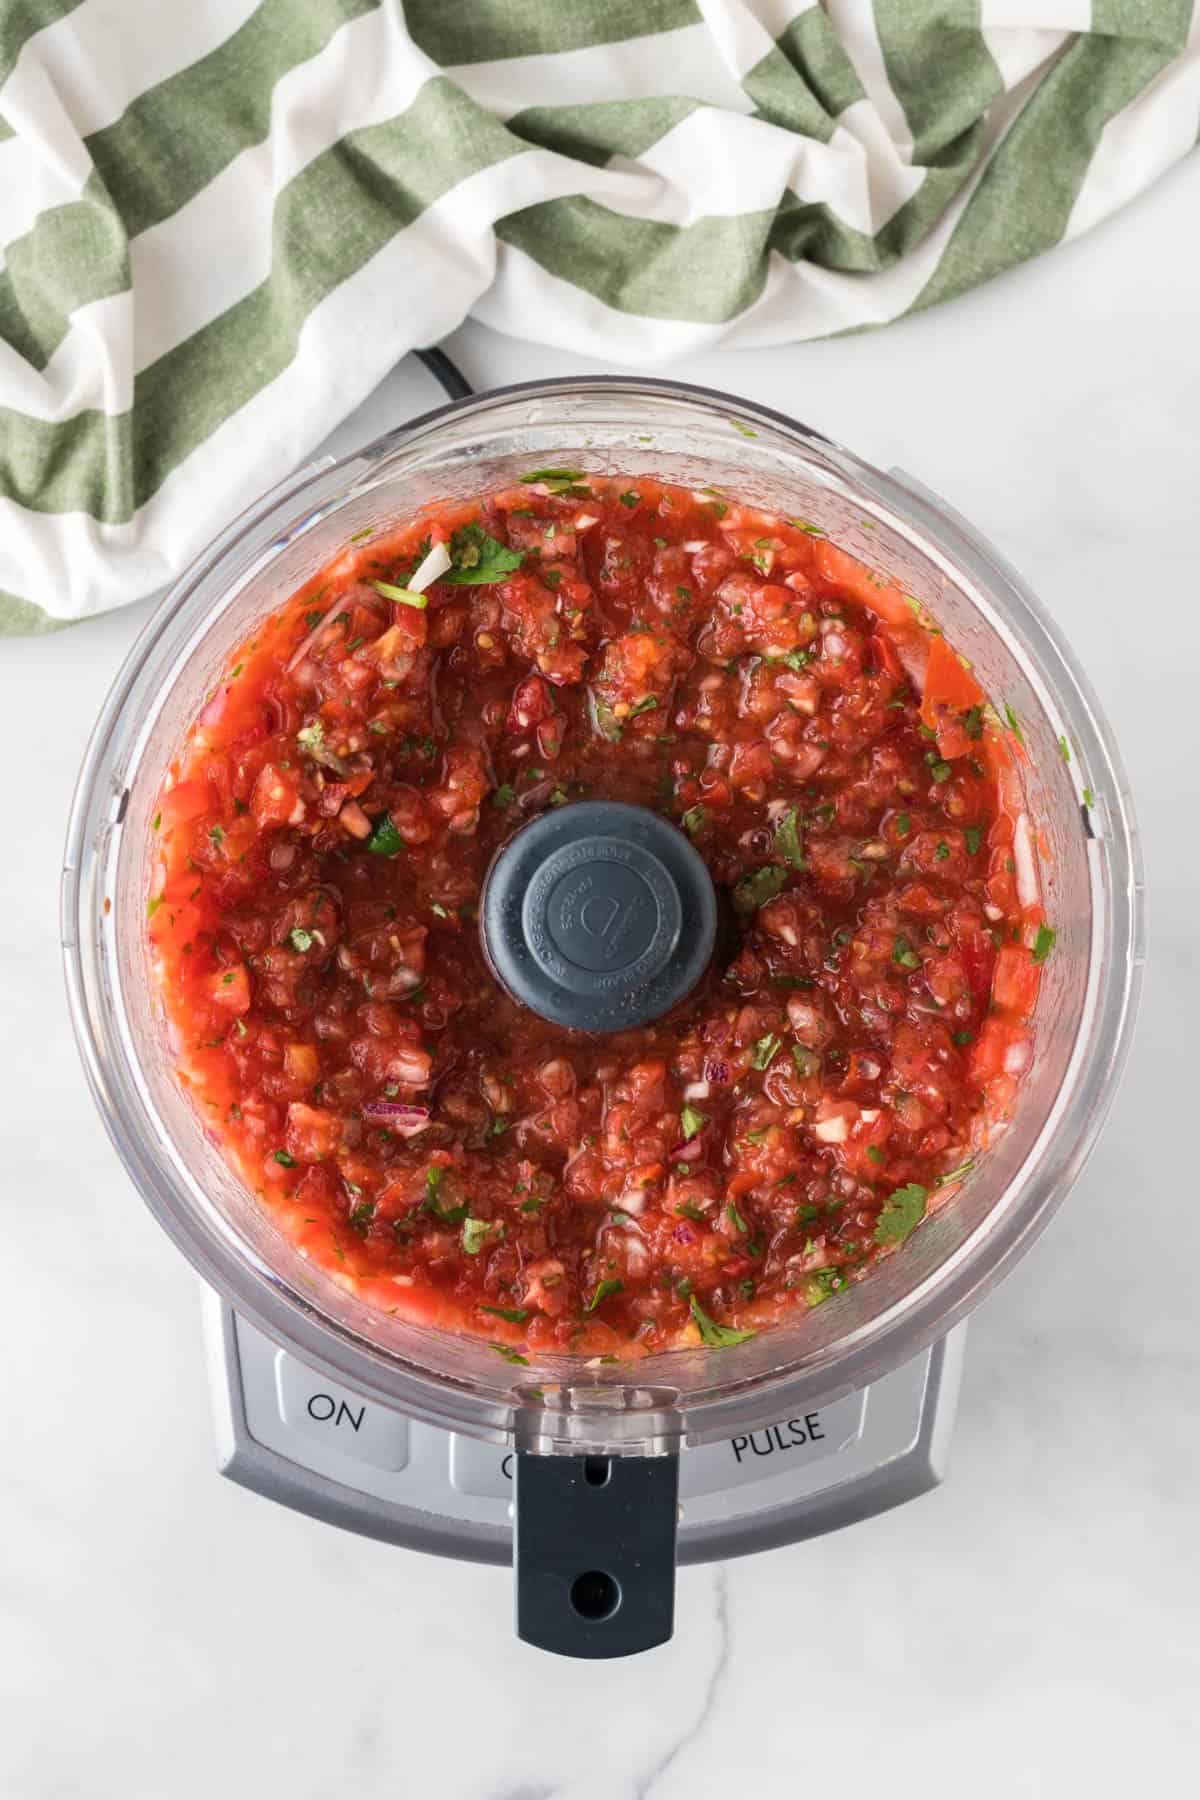 salsa in the food processor mixed together